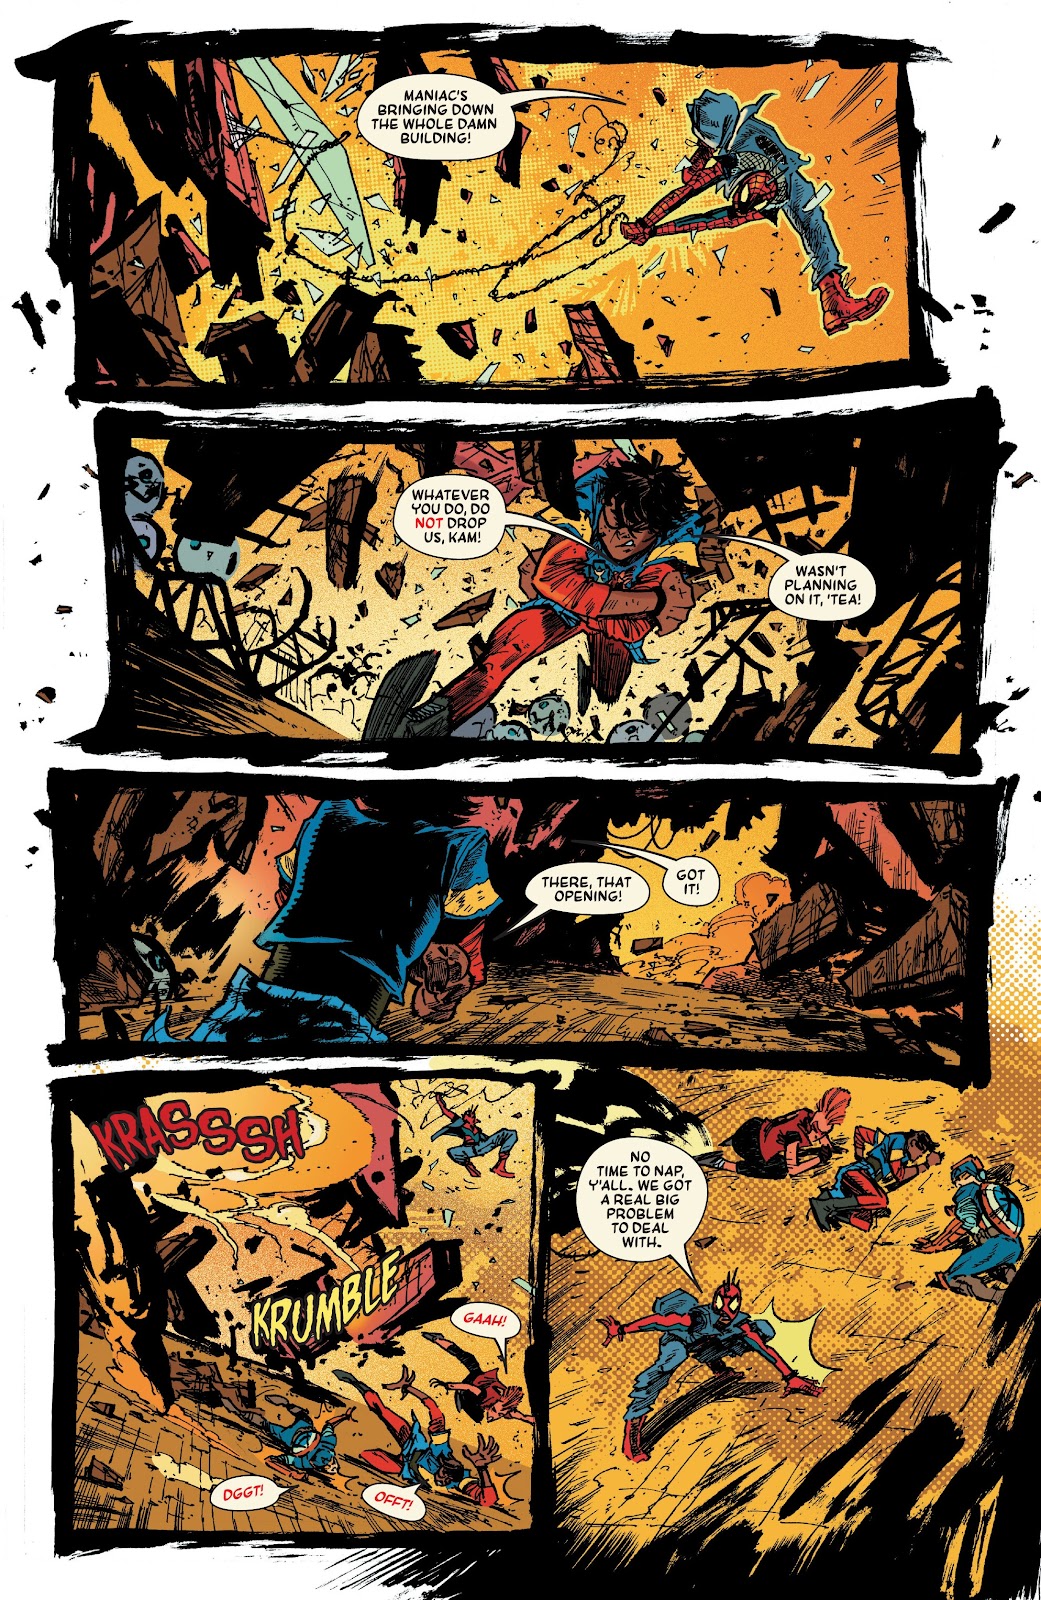 Spider-Punk: Arms Race issue 3 - Page 19